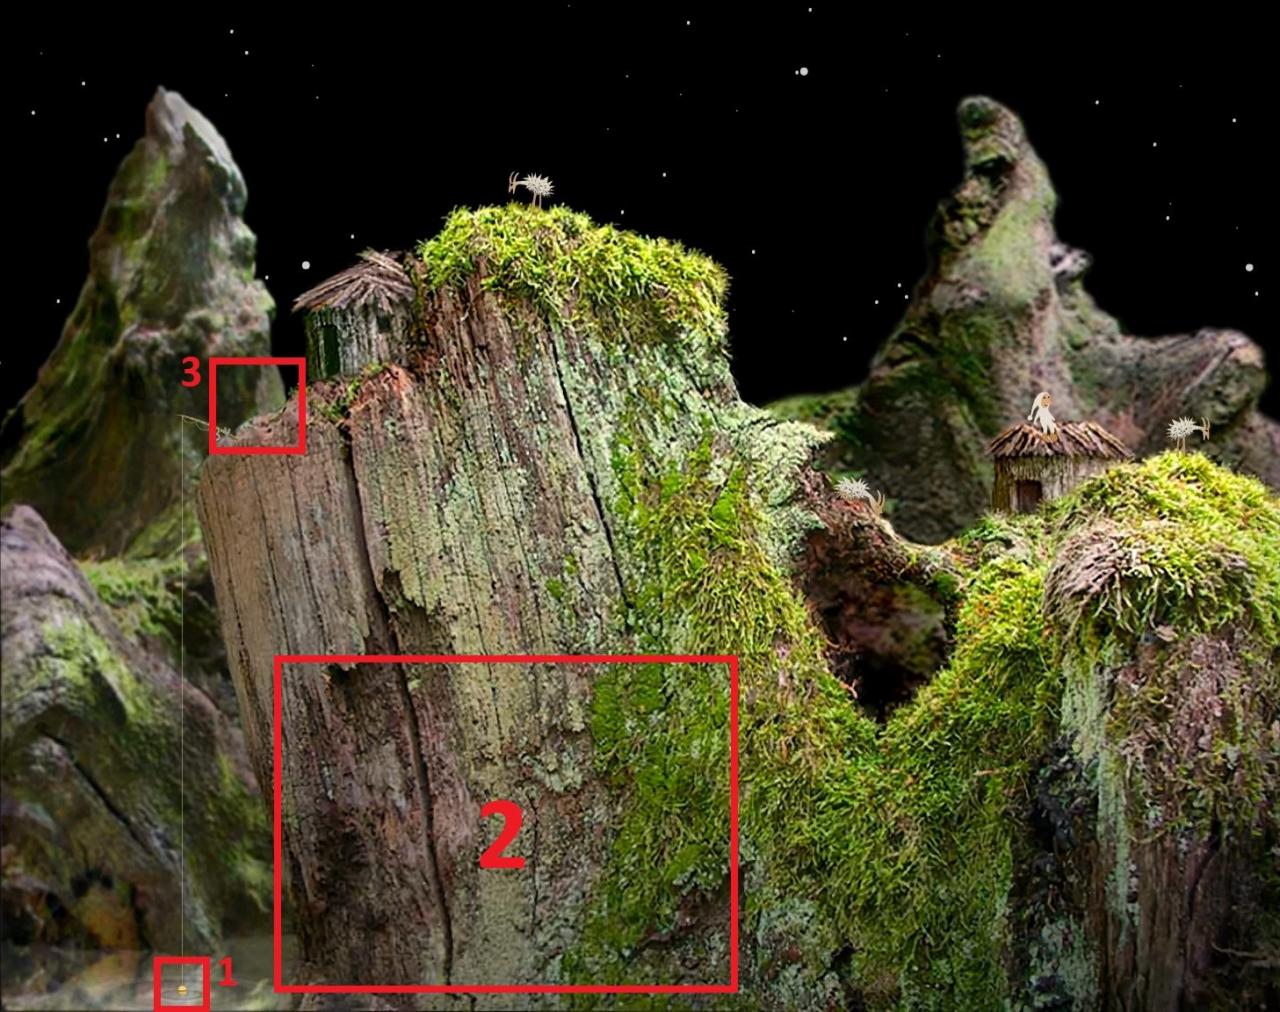 Samorost 1 100% Walktrhough Guide With Images